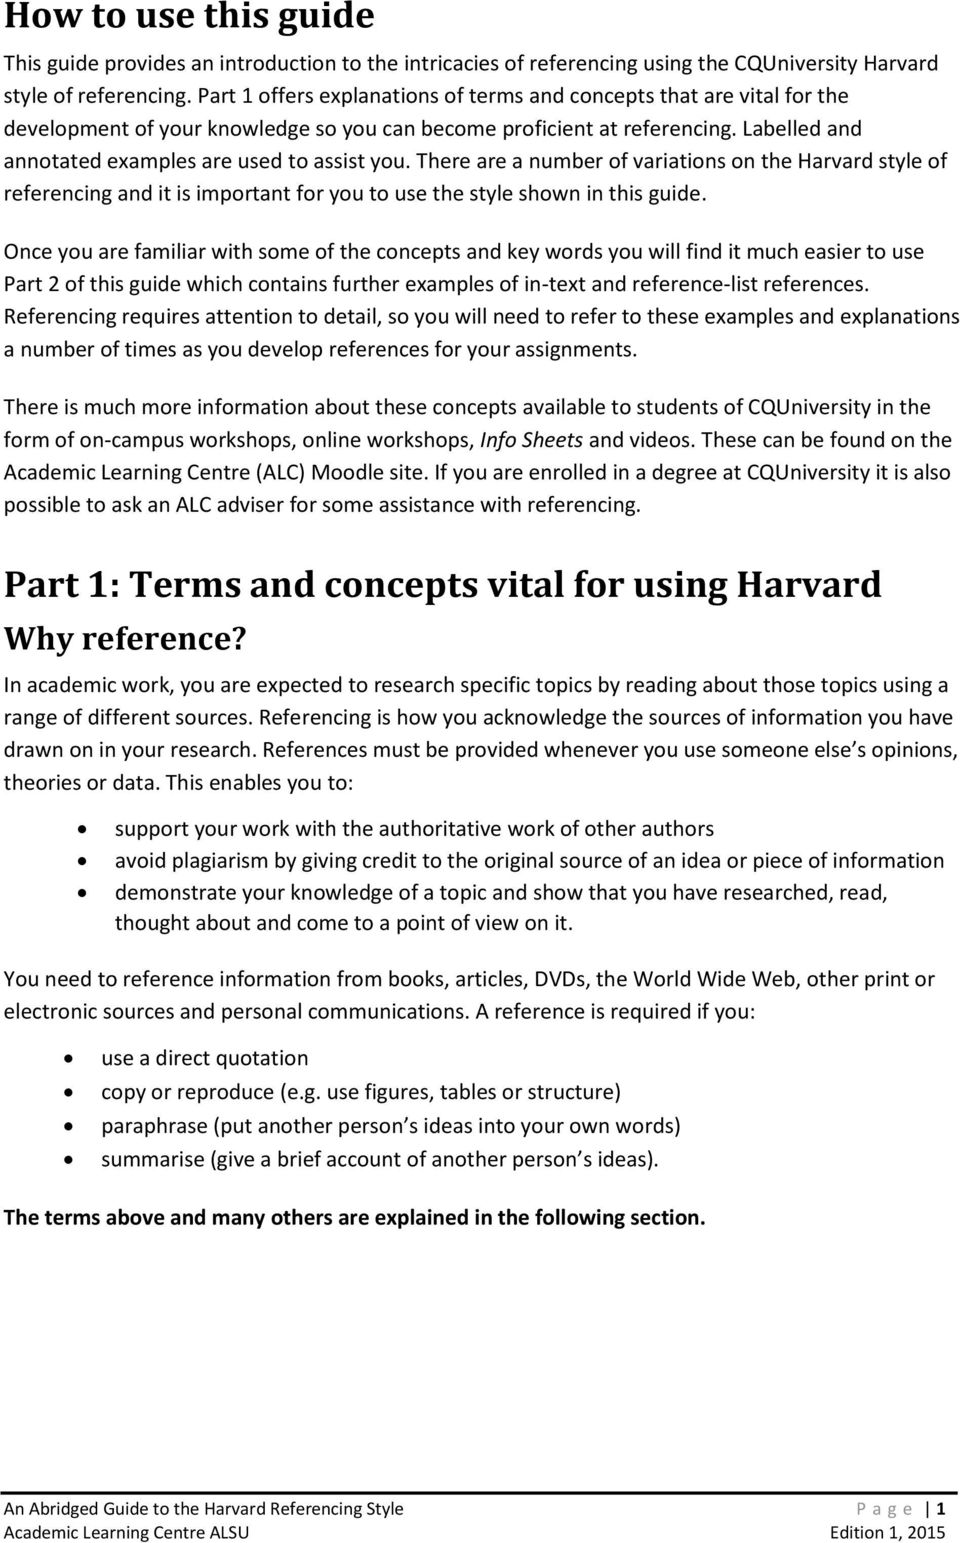 harvard referencing explained